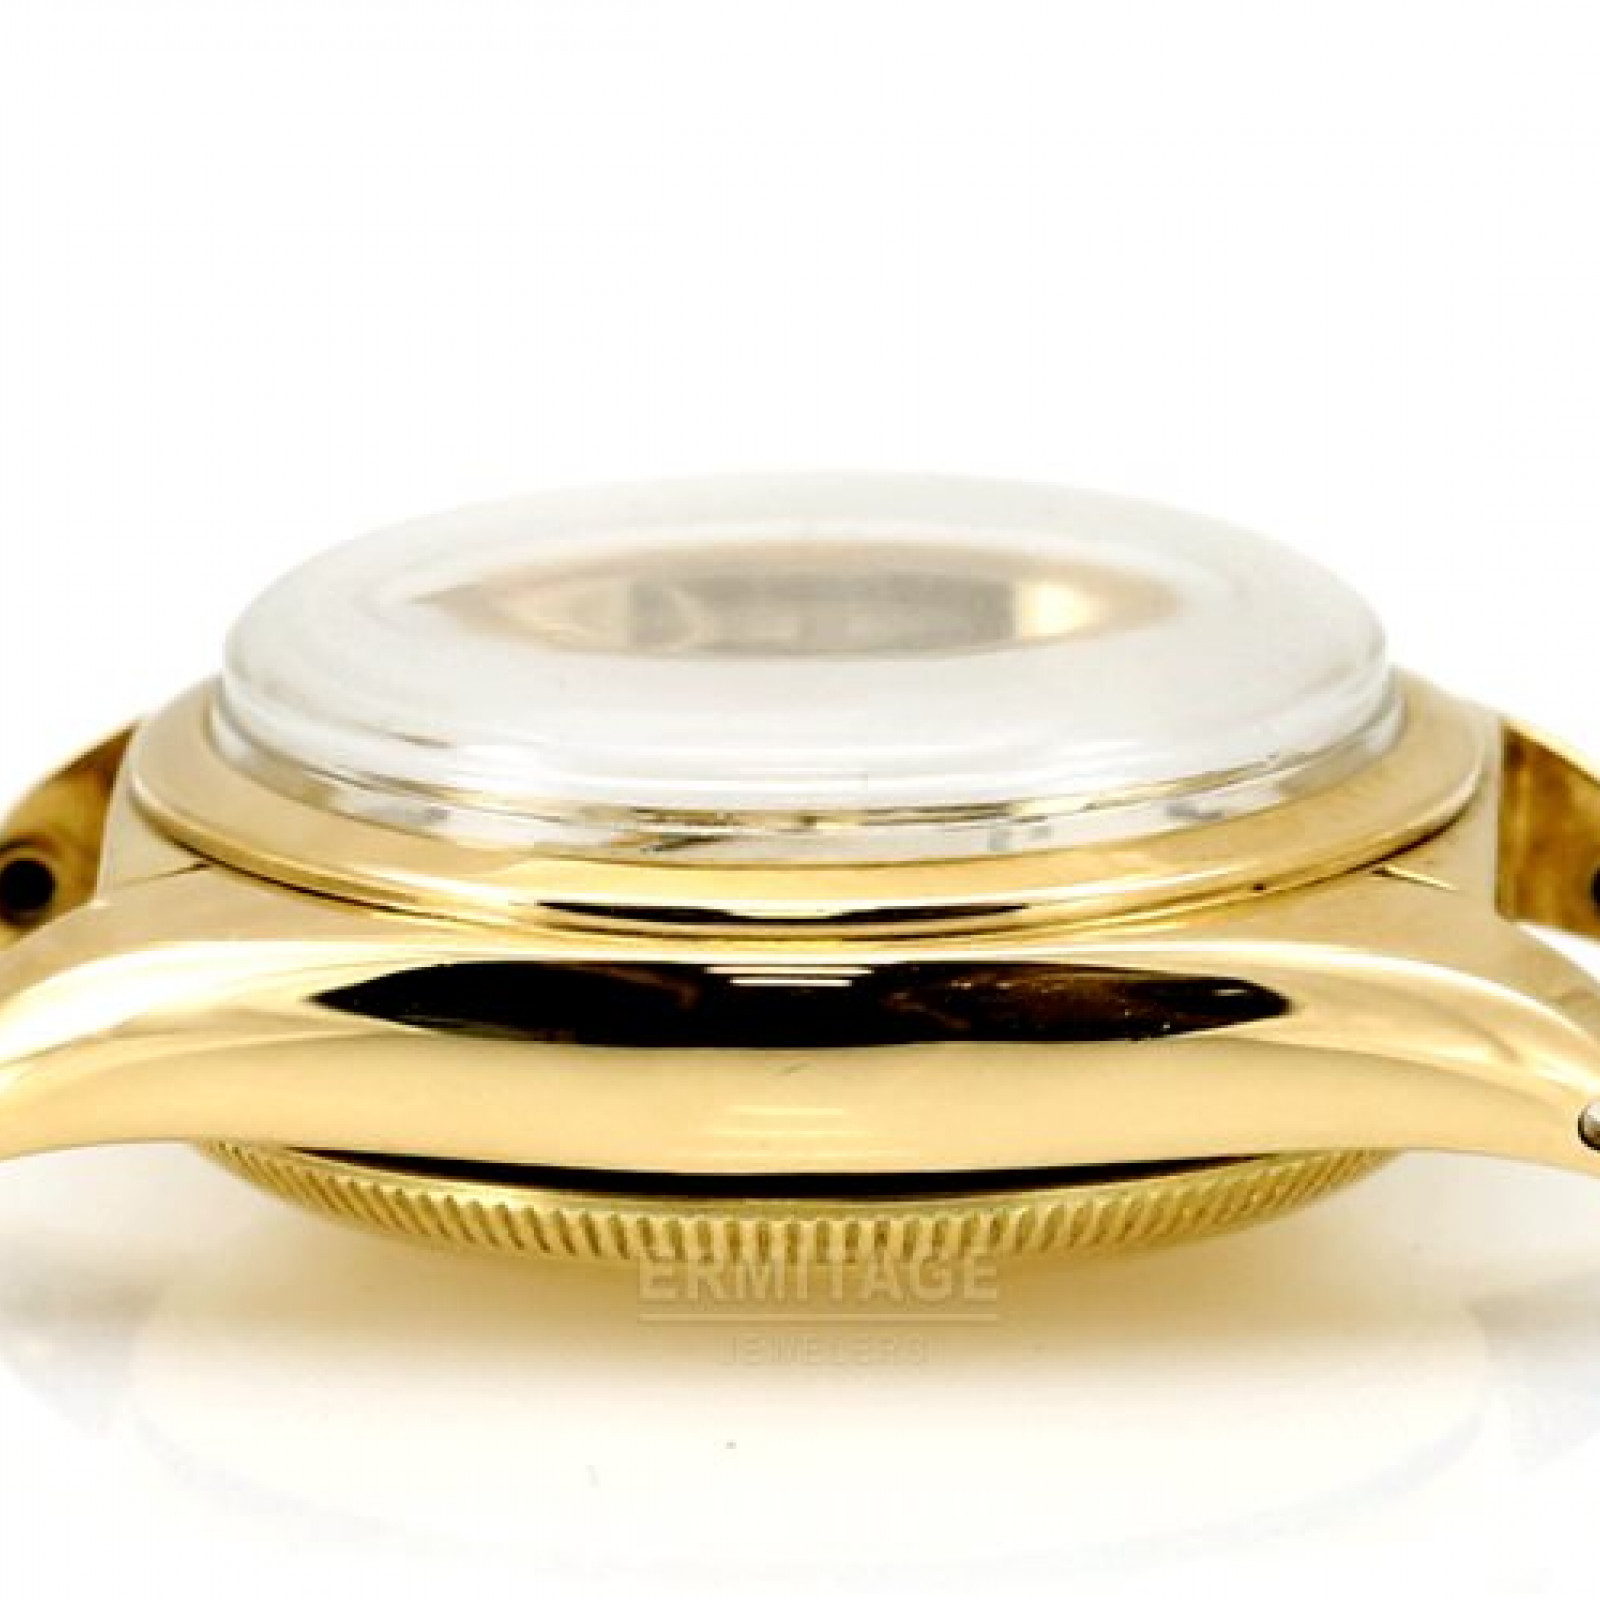 Rolex Oyster Perpetual 5050 Gold